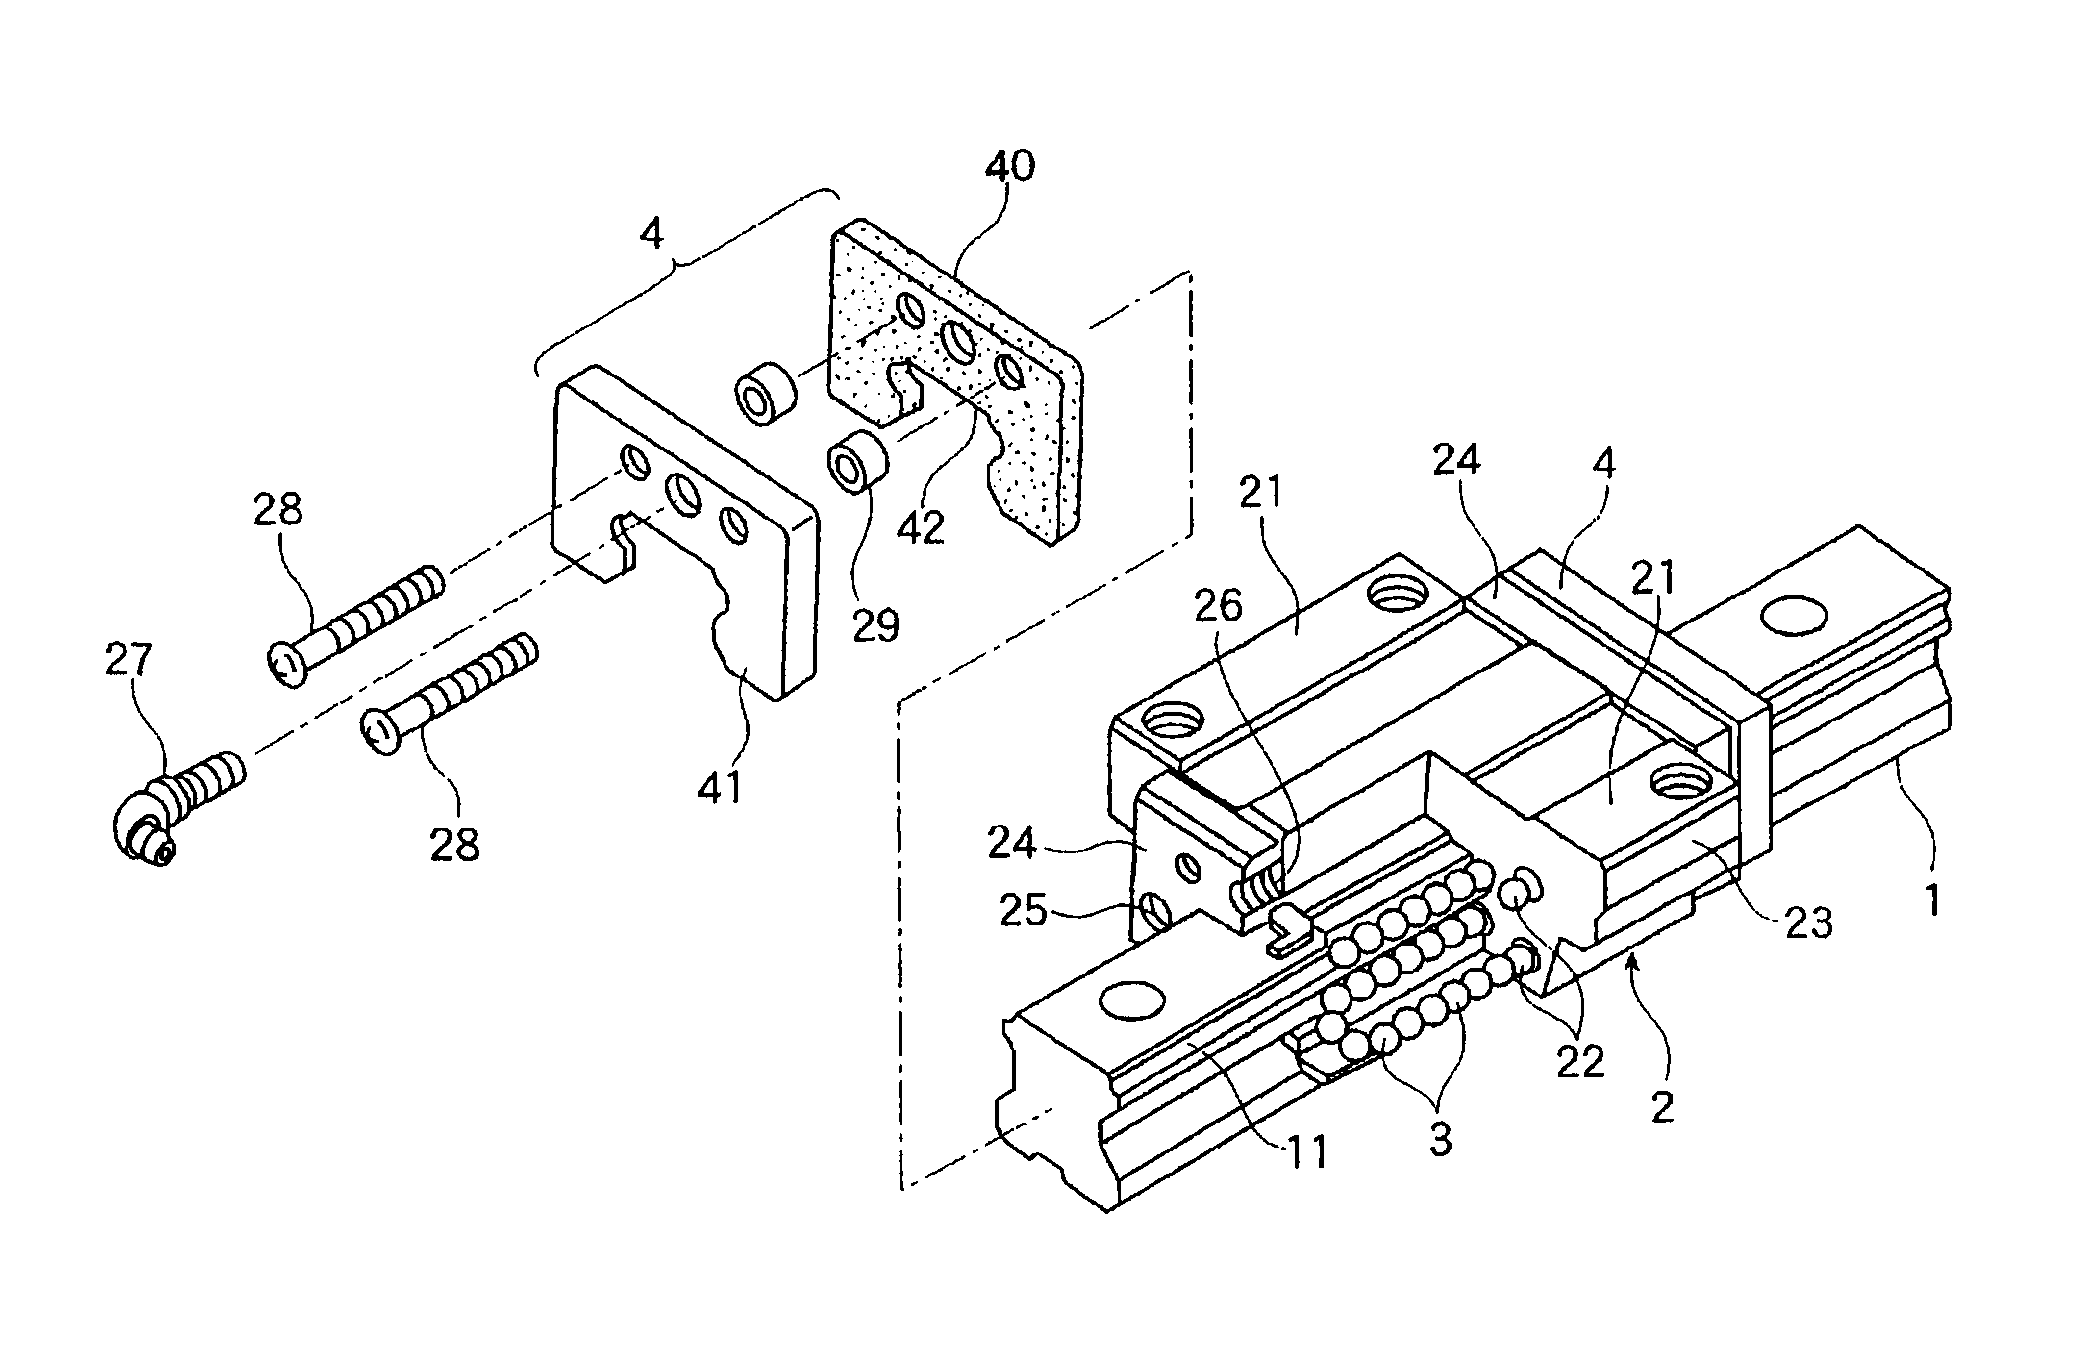 Seal plate for a movement guide device